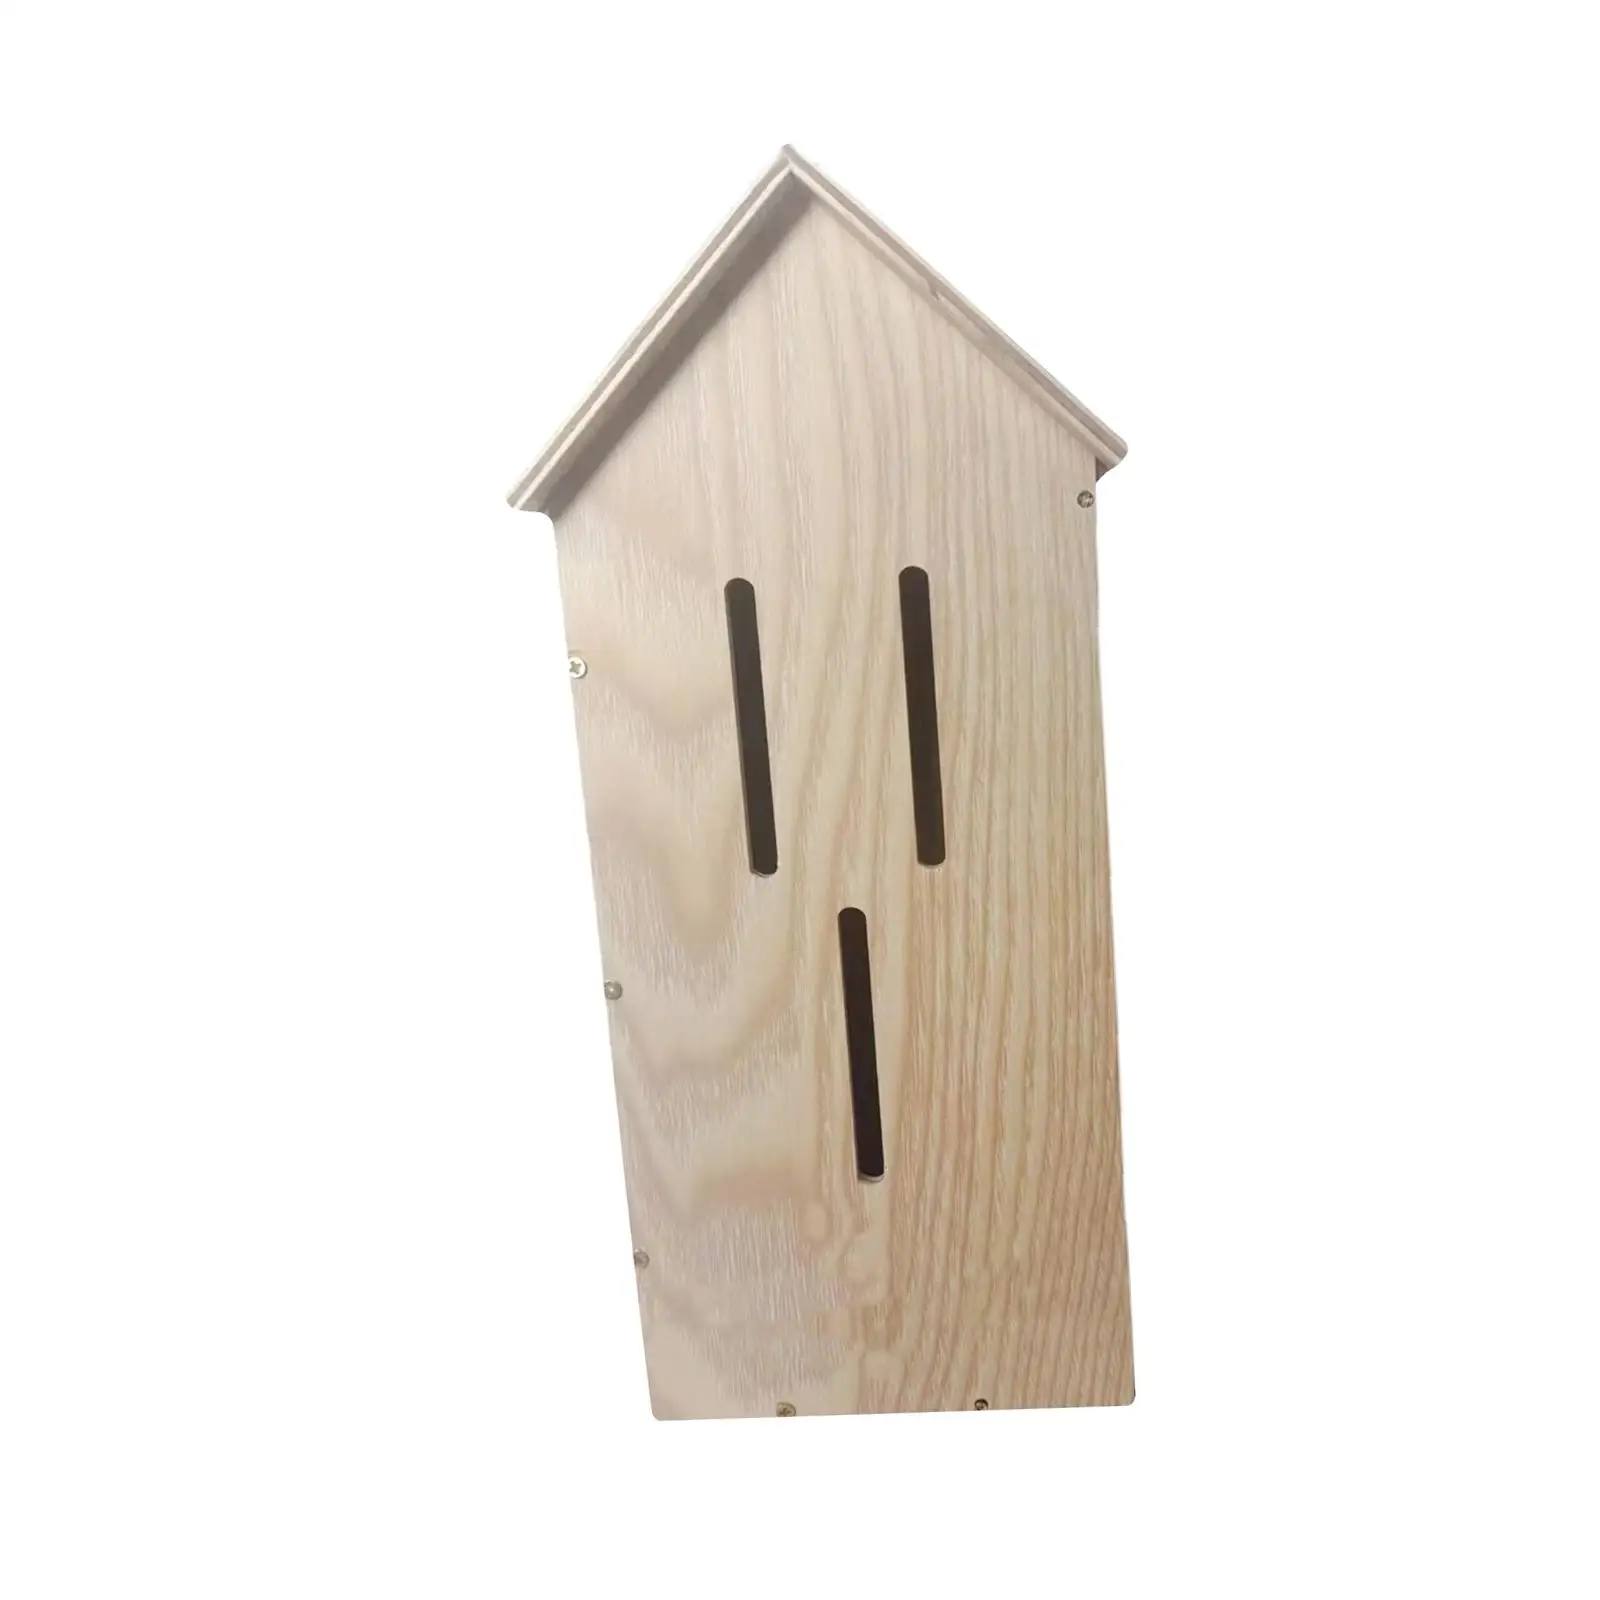 Butterfly Habitat Supplies,Tree Trunk Protector Guard,Bird house Kit, House for Hotel Garden Outdoor Room